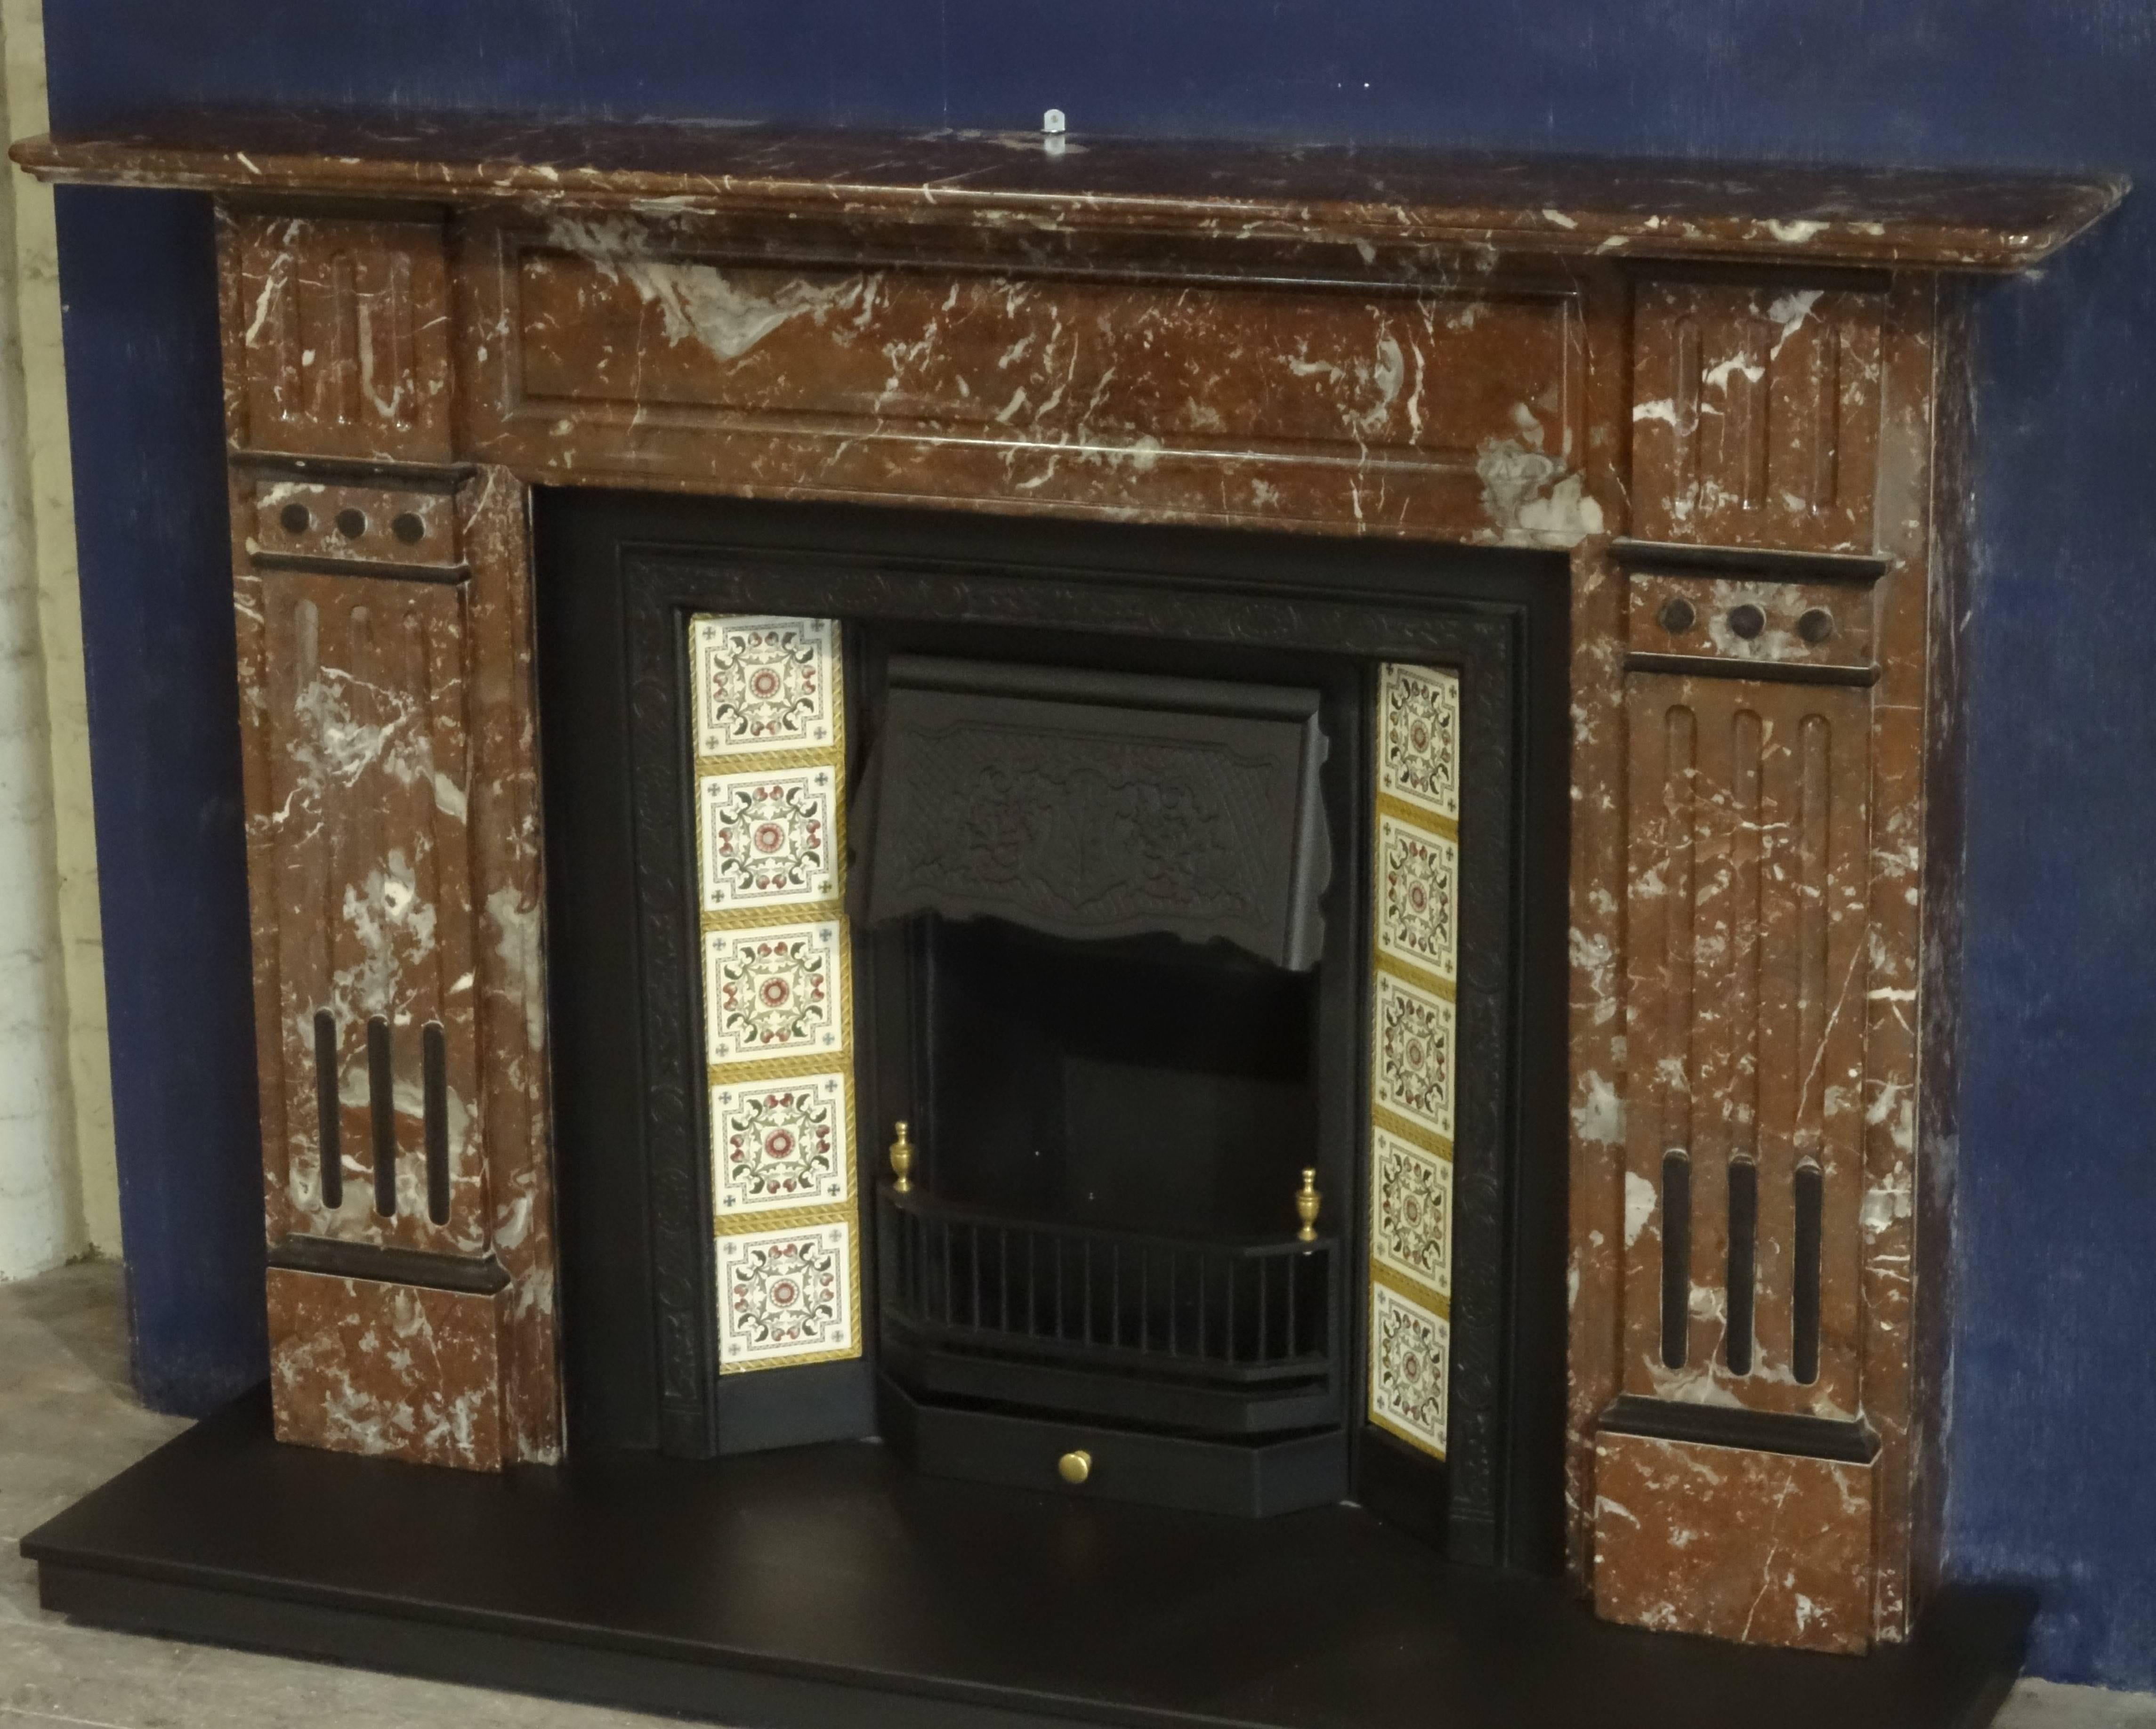 19th century antique Victorian carved breccia marble fireplace surround with polished slate mouldings. Reclaimed from a Victorian property in County Antrim Northern Ireland. Tiled cast iron insert and slate hearth priced separately.

Approximate